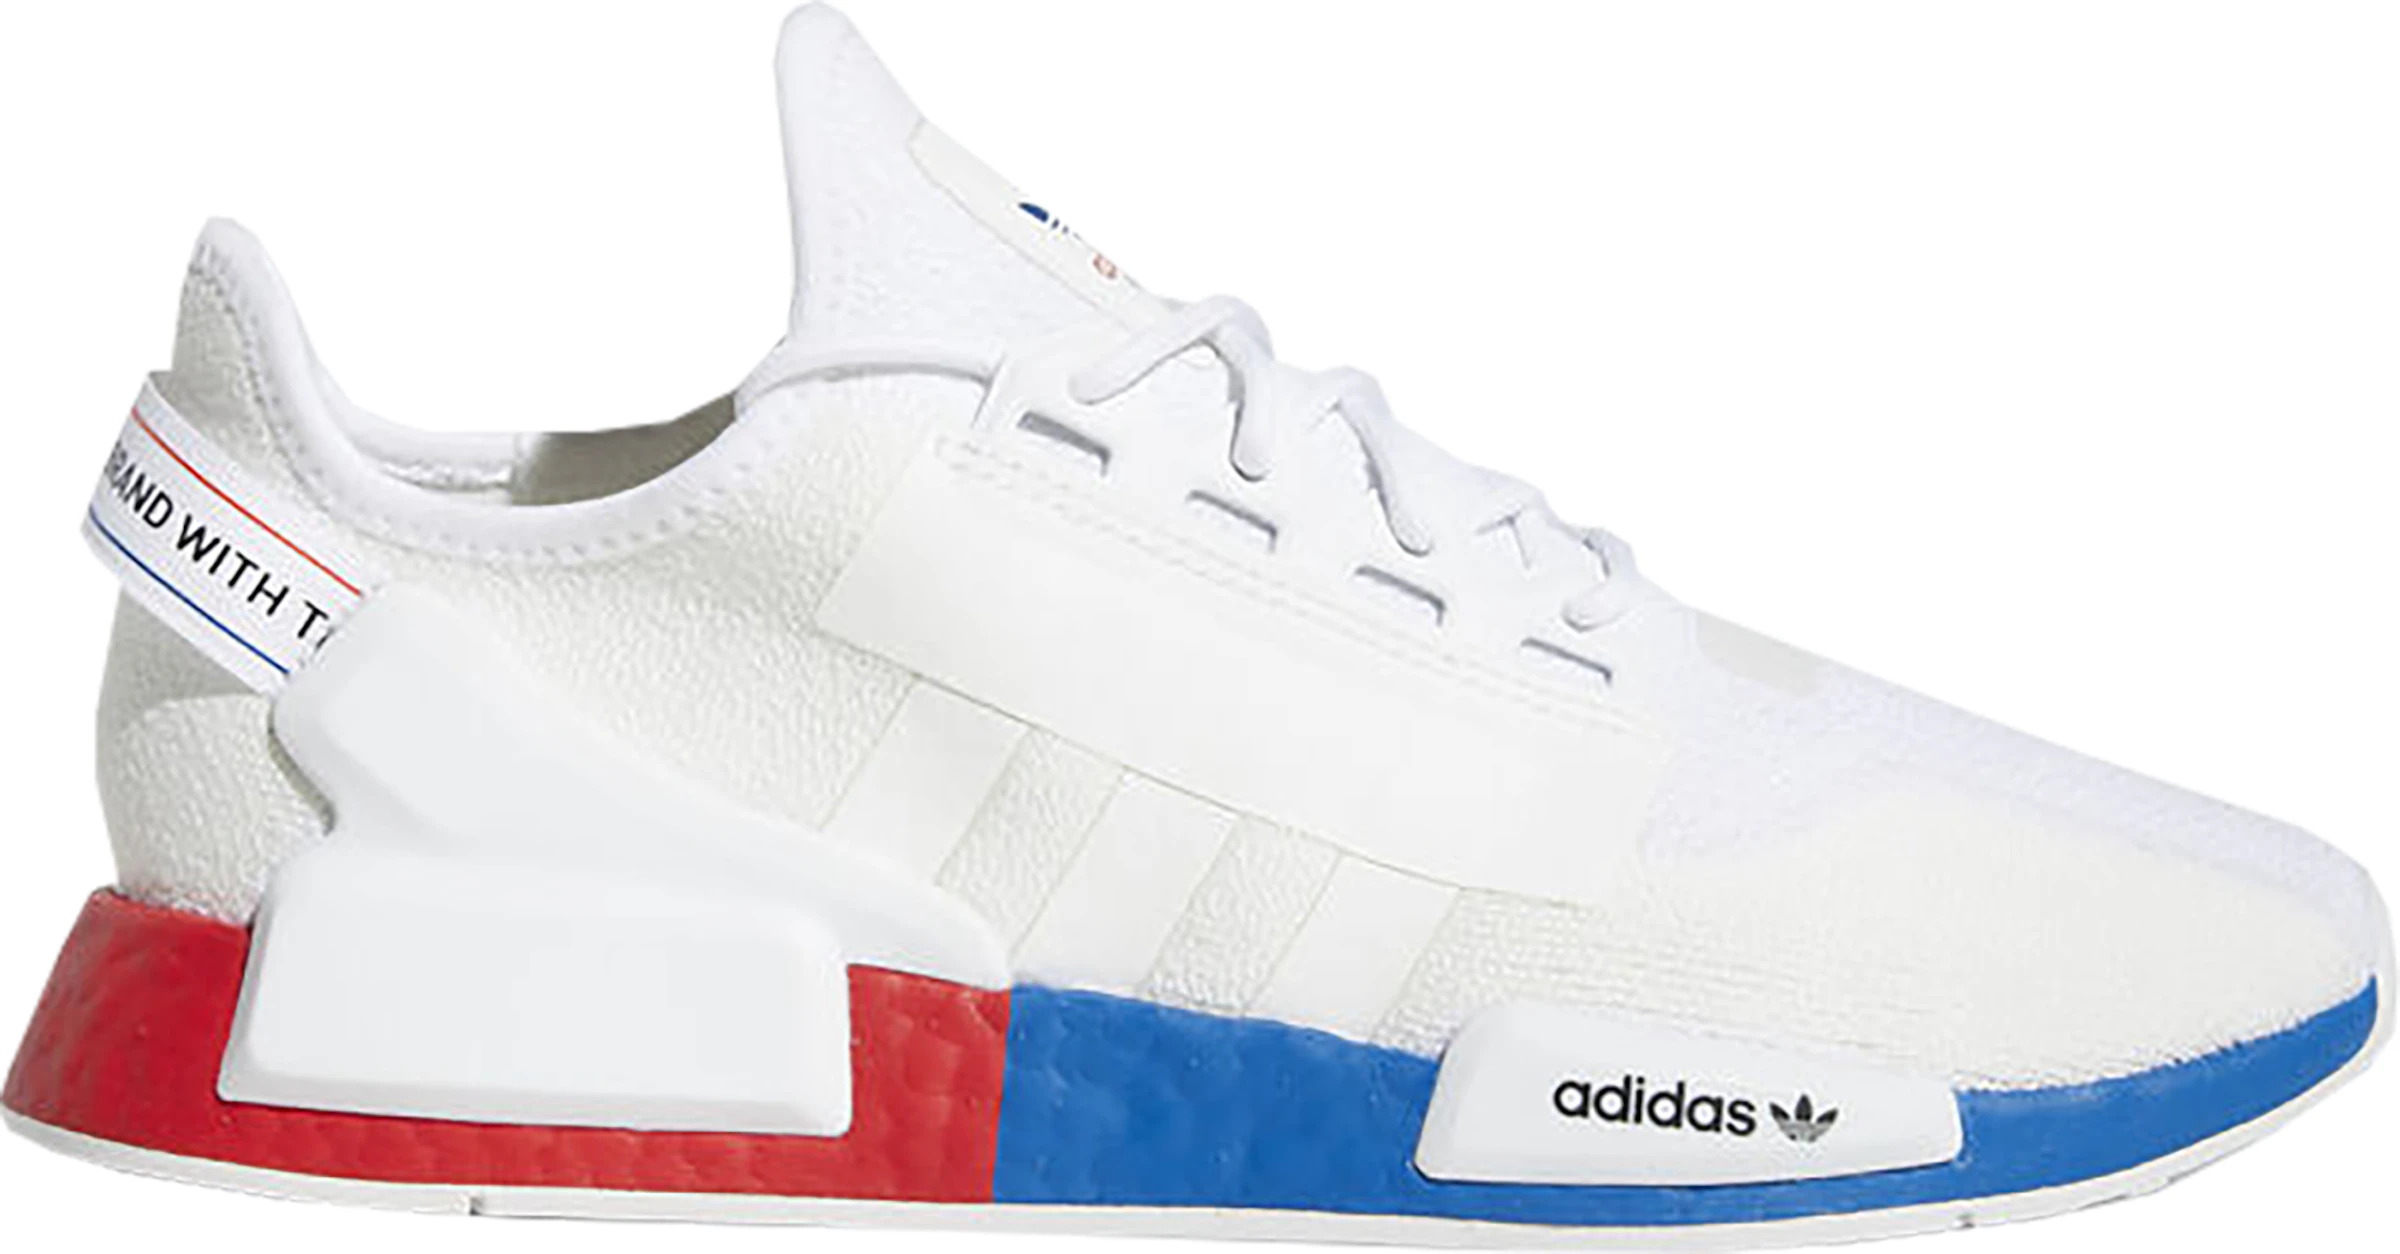 NMD R1 White Red Blue FX4148 -